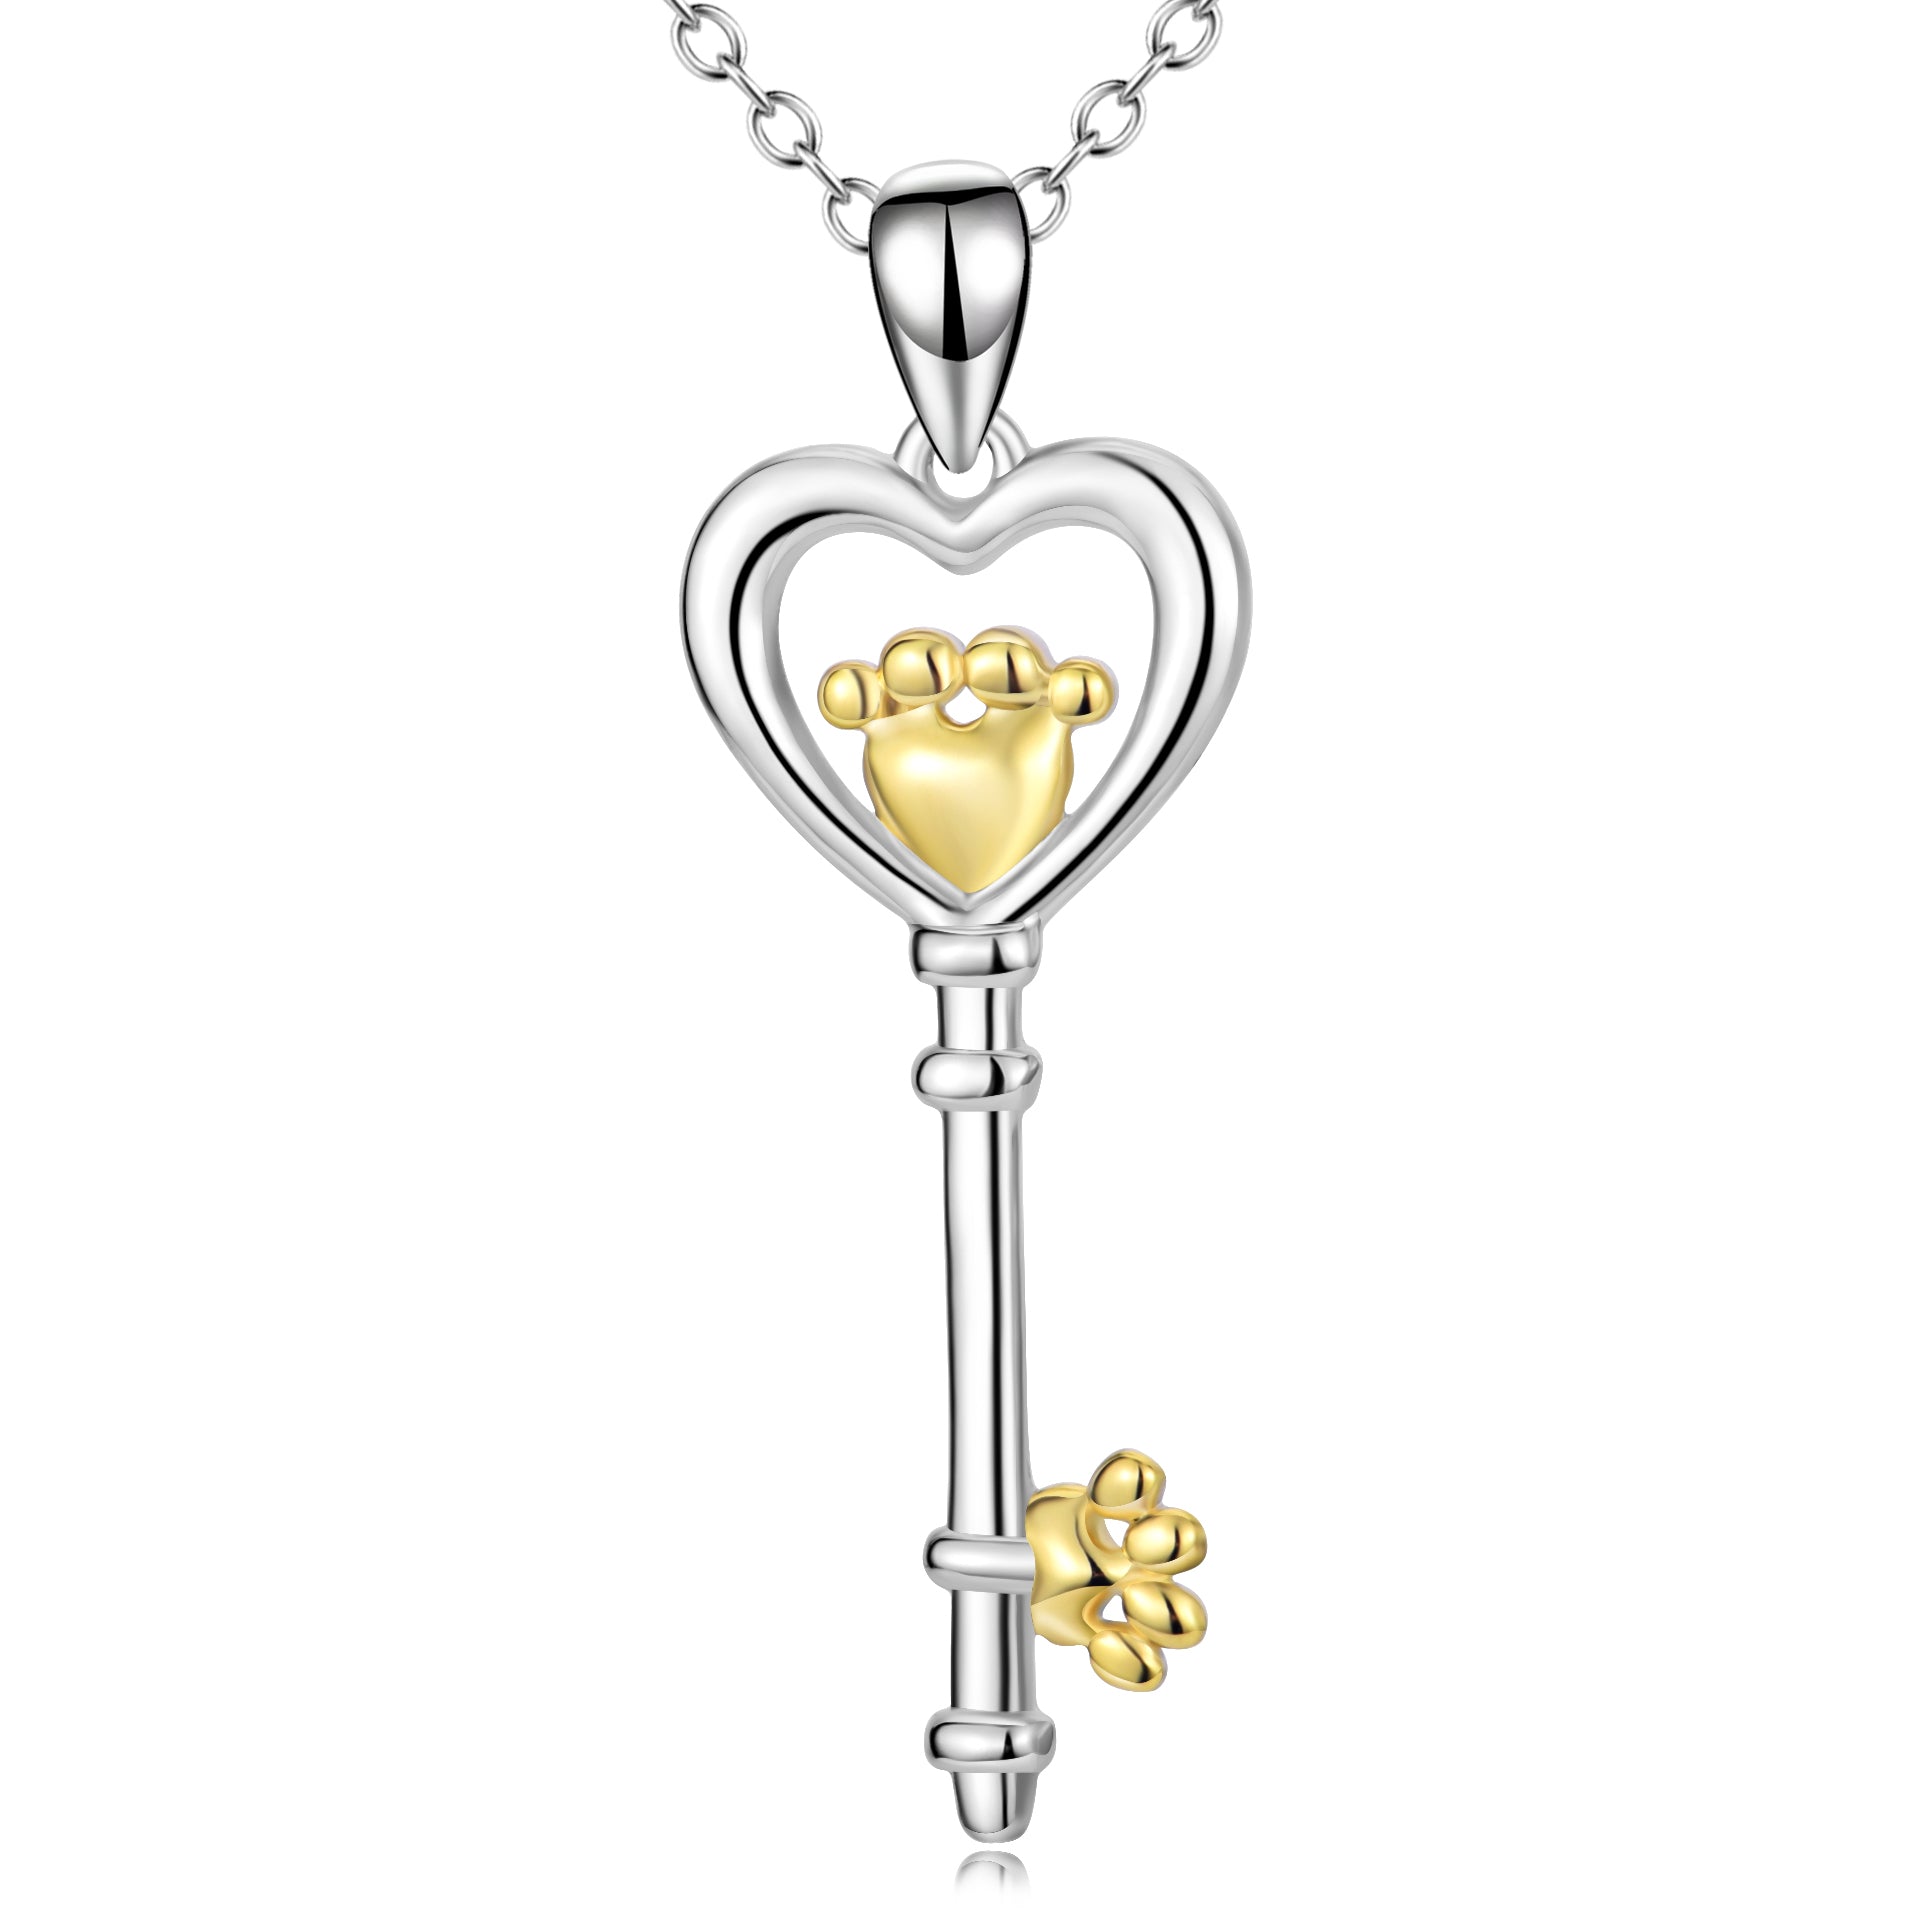 Diamond Heart Lock and Key Necklace in 14k Rose Gold Plate and